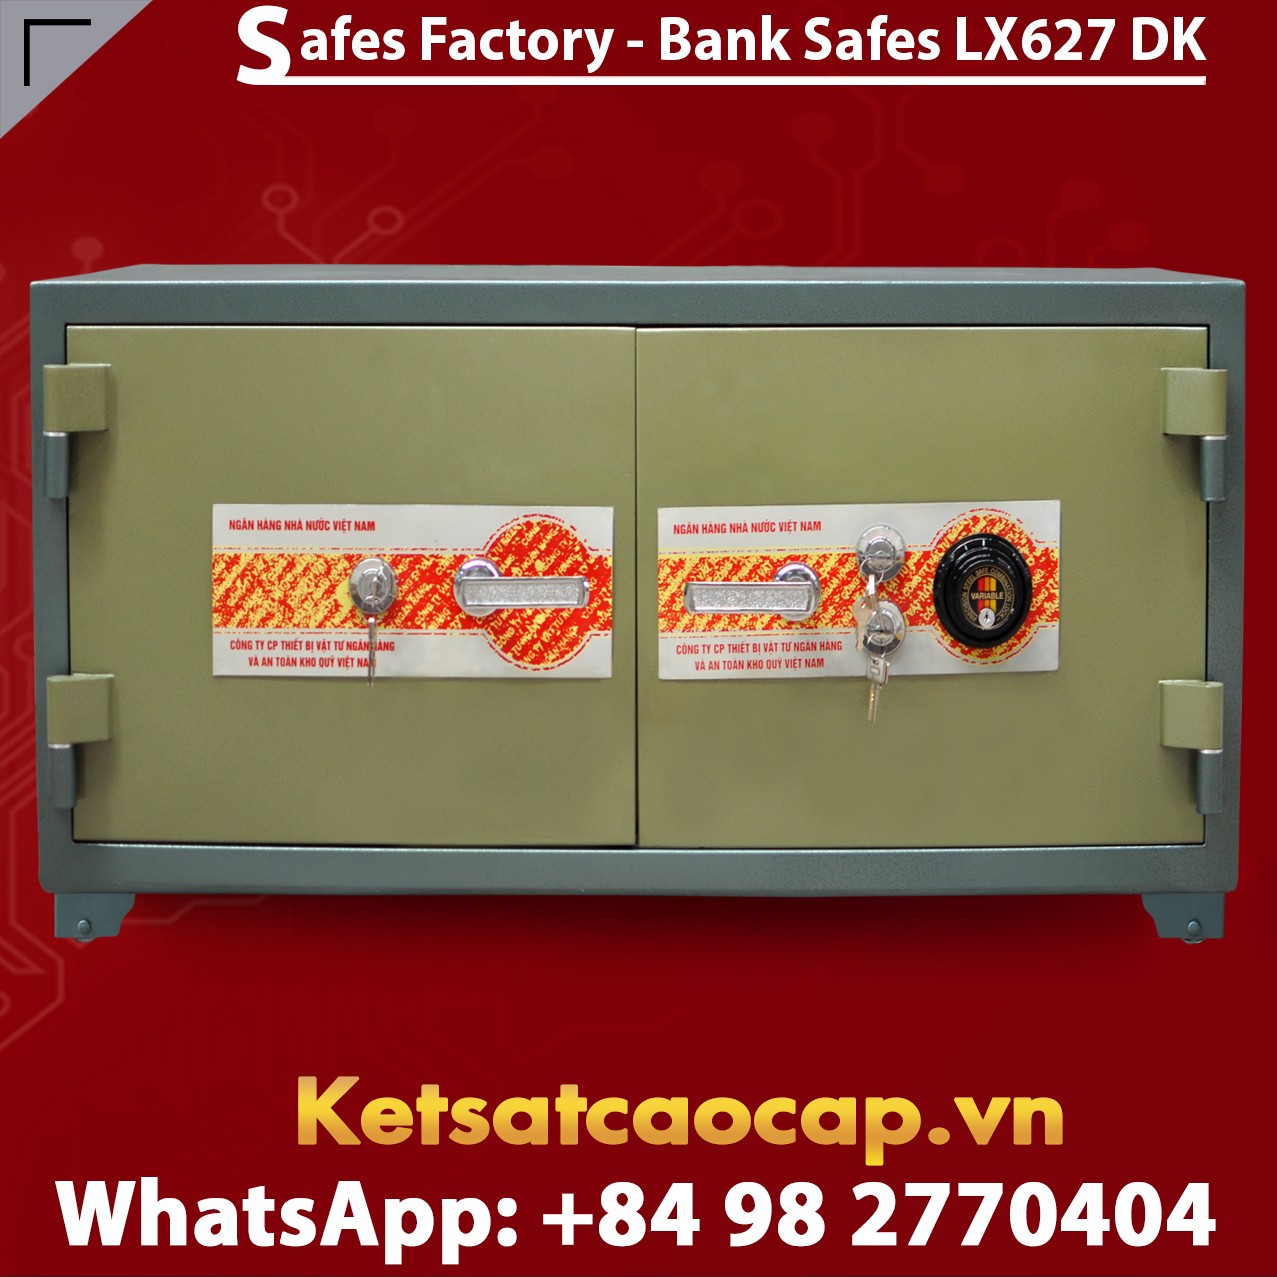 Bank Safe LX627 DK Two Doors Cheap Price Stainless Steel Security Safe